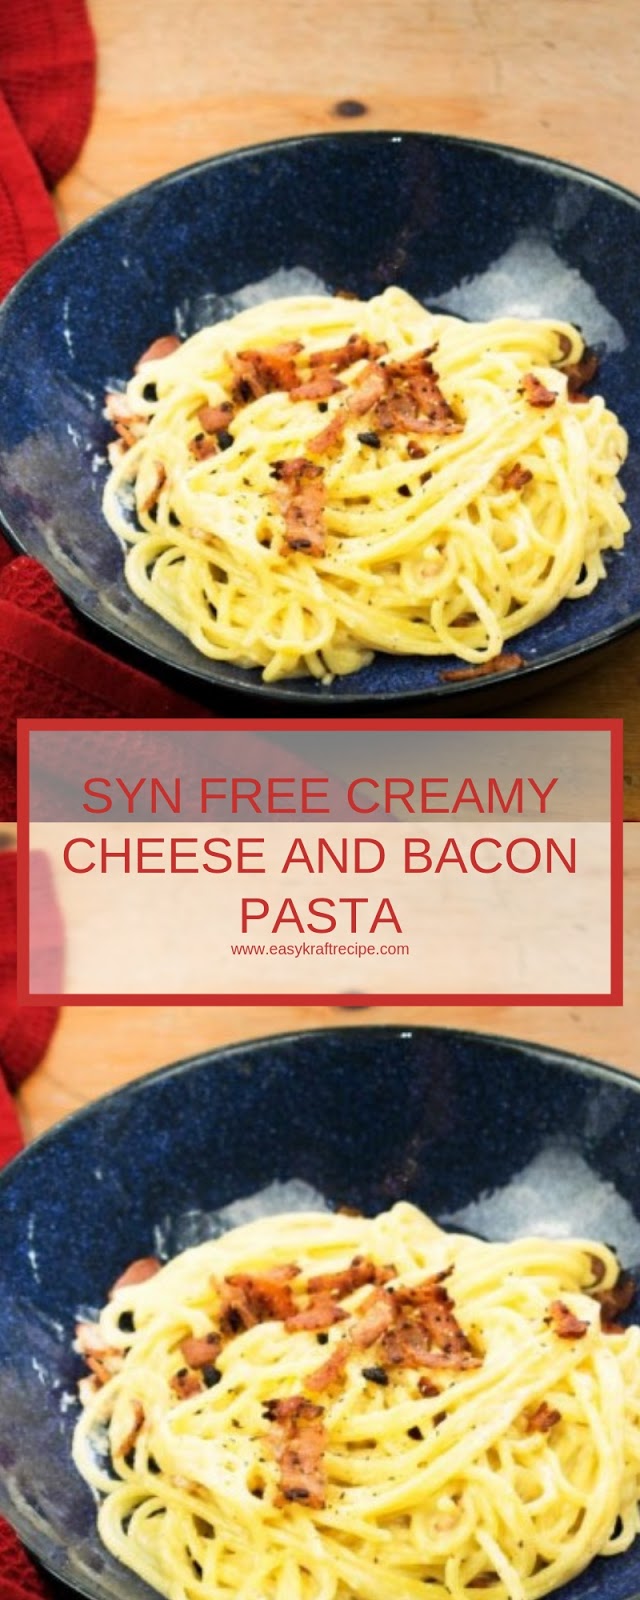 SYN FREE CREAMY CHEESE AND BACON PASTA